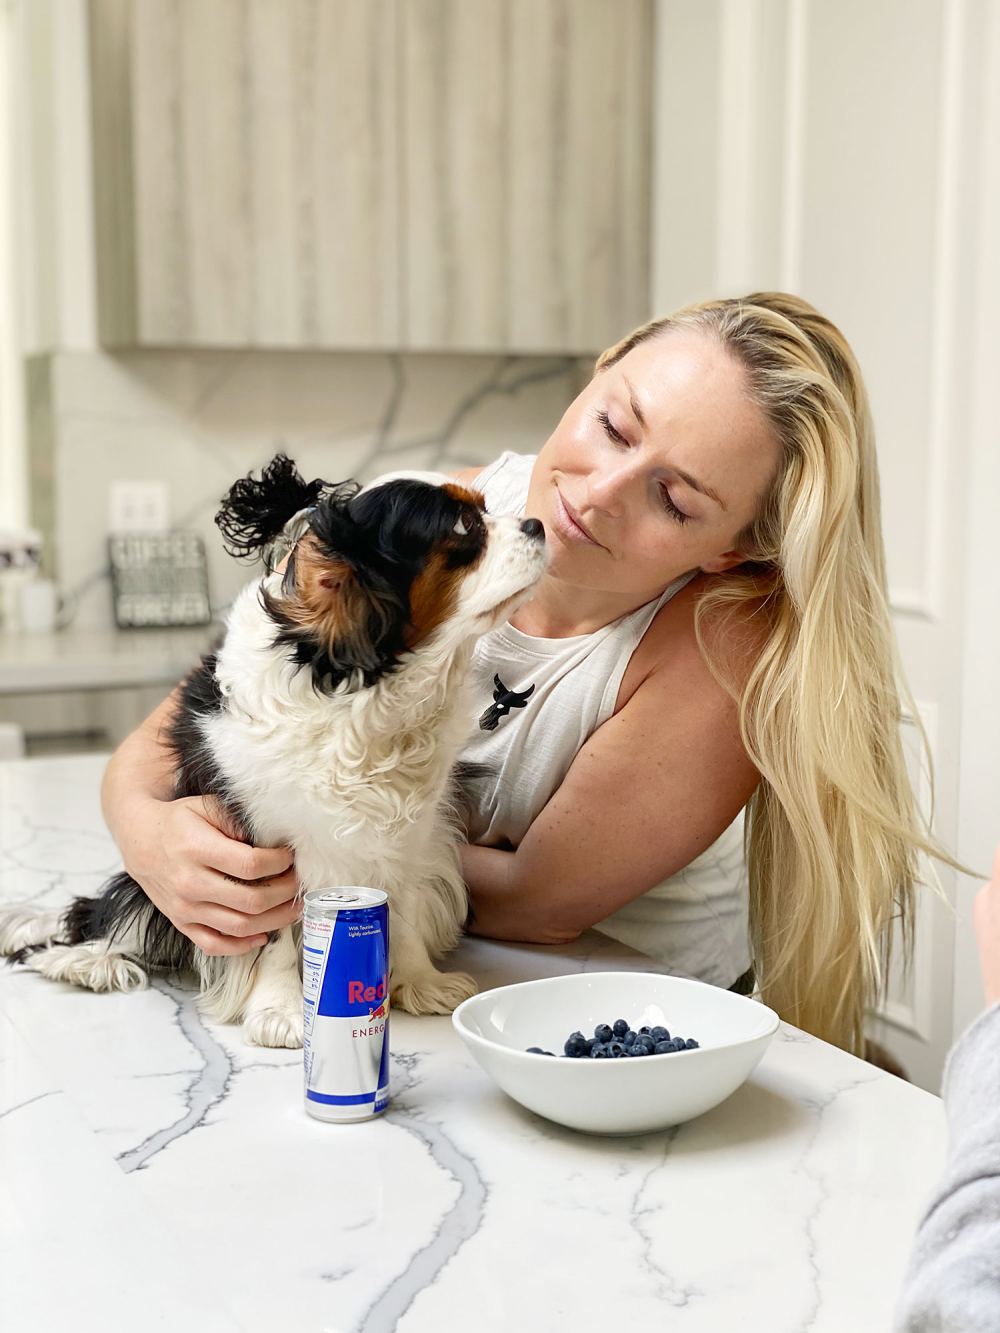 Lindsey Vonn and Her Dog Lucy How I Spend a Typical Day in Quarantine During the Coronavirus Outbreak